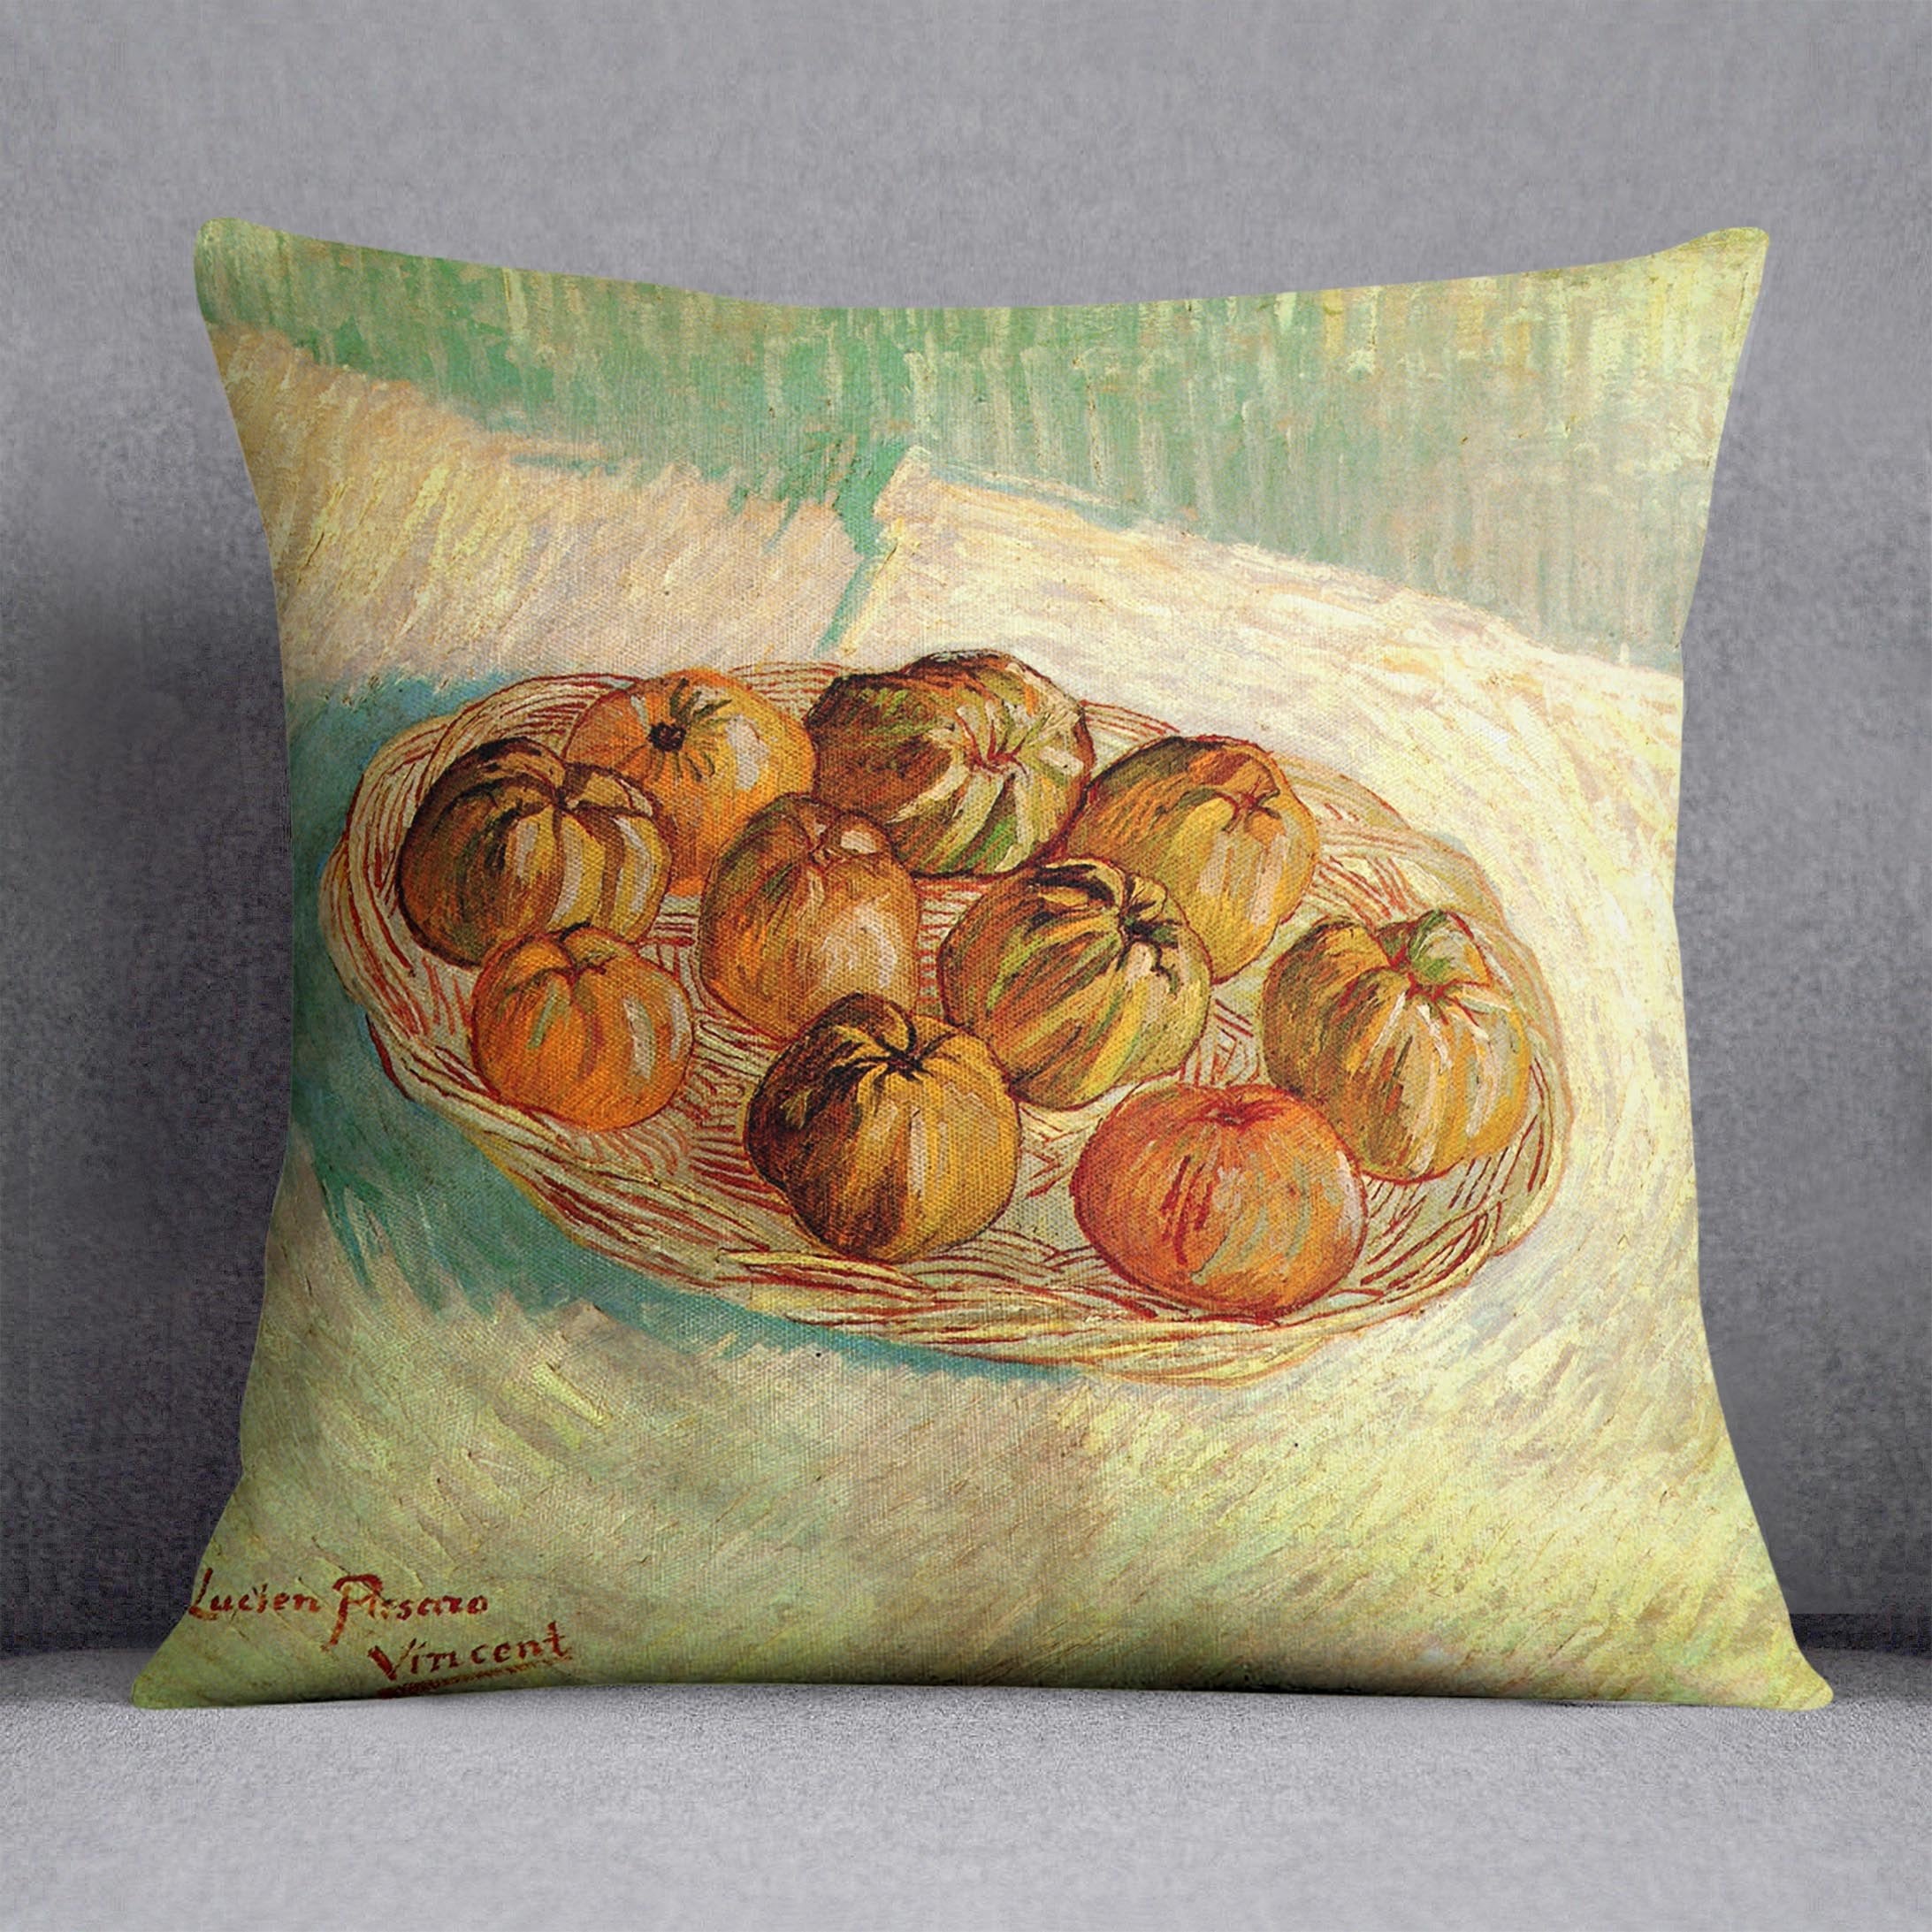 Still Life with Basket of Apples to Lucien Pissarro by Van Gogh Throw Pillow